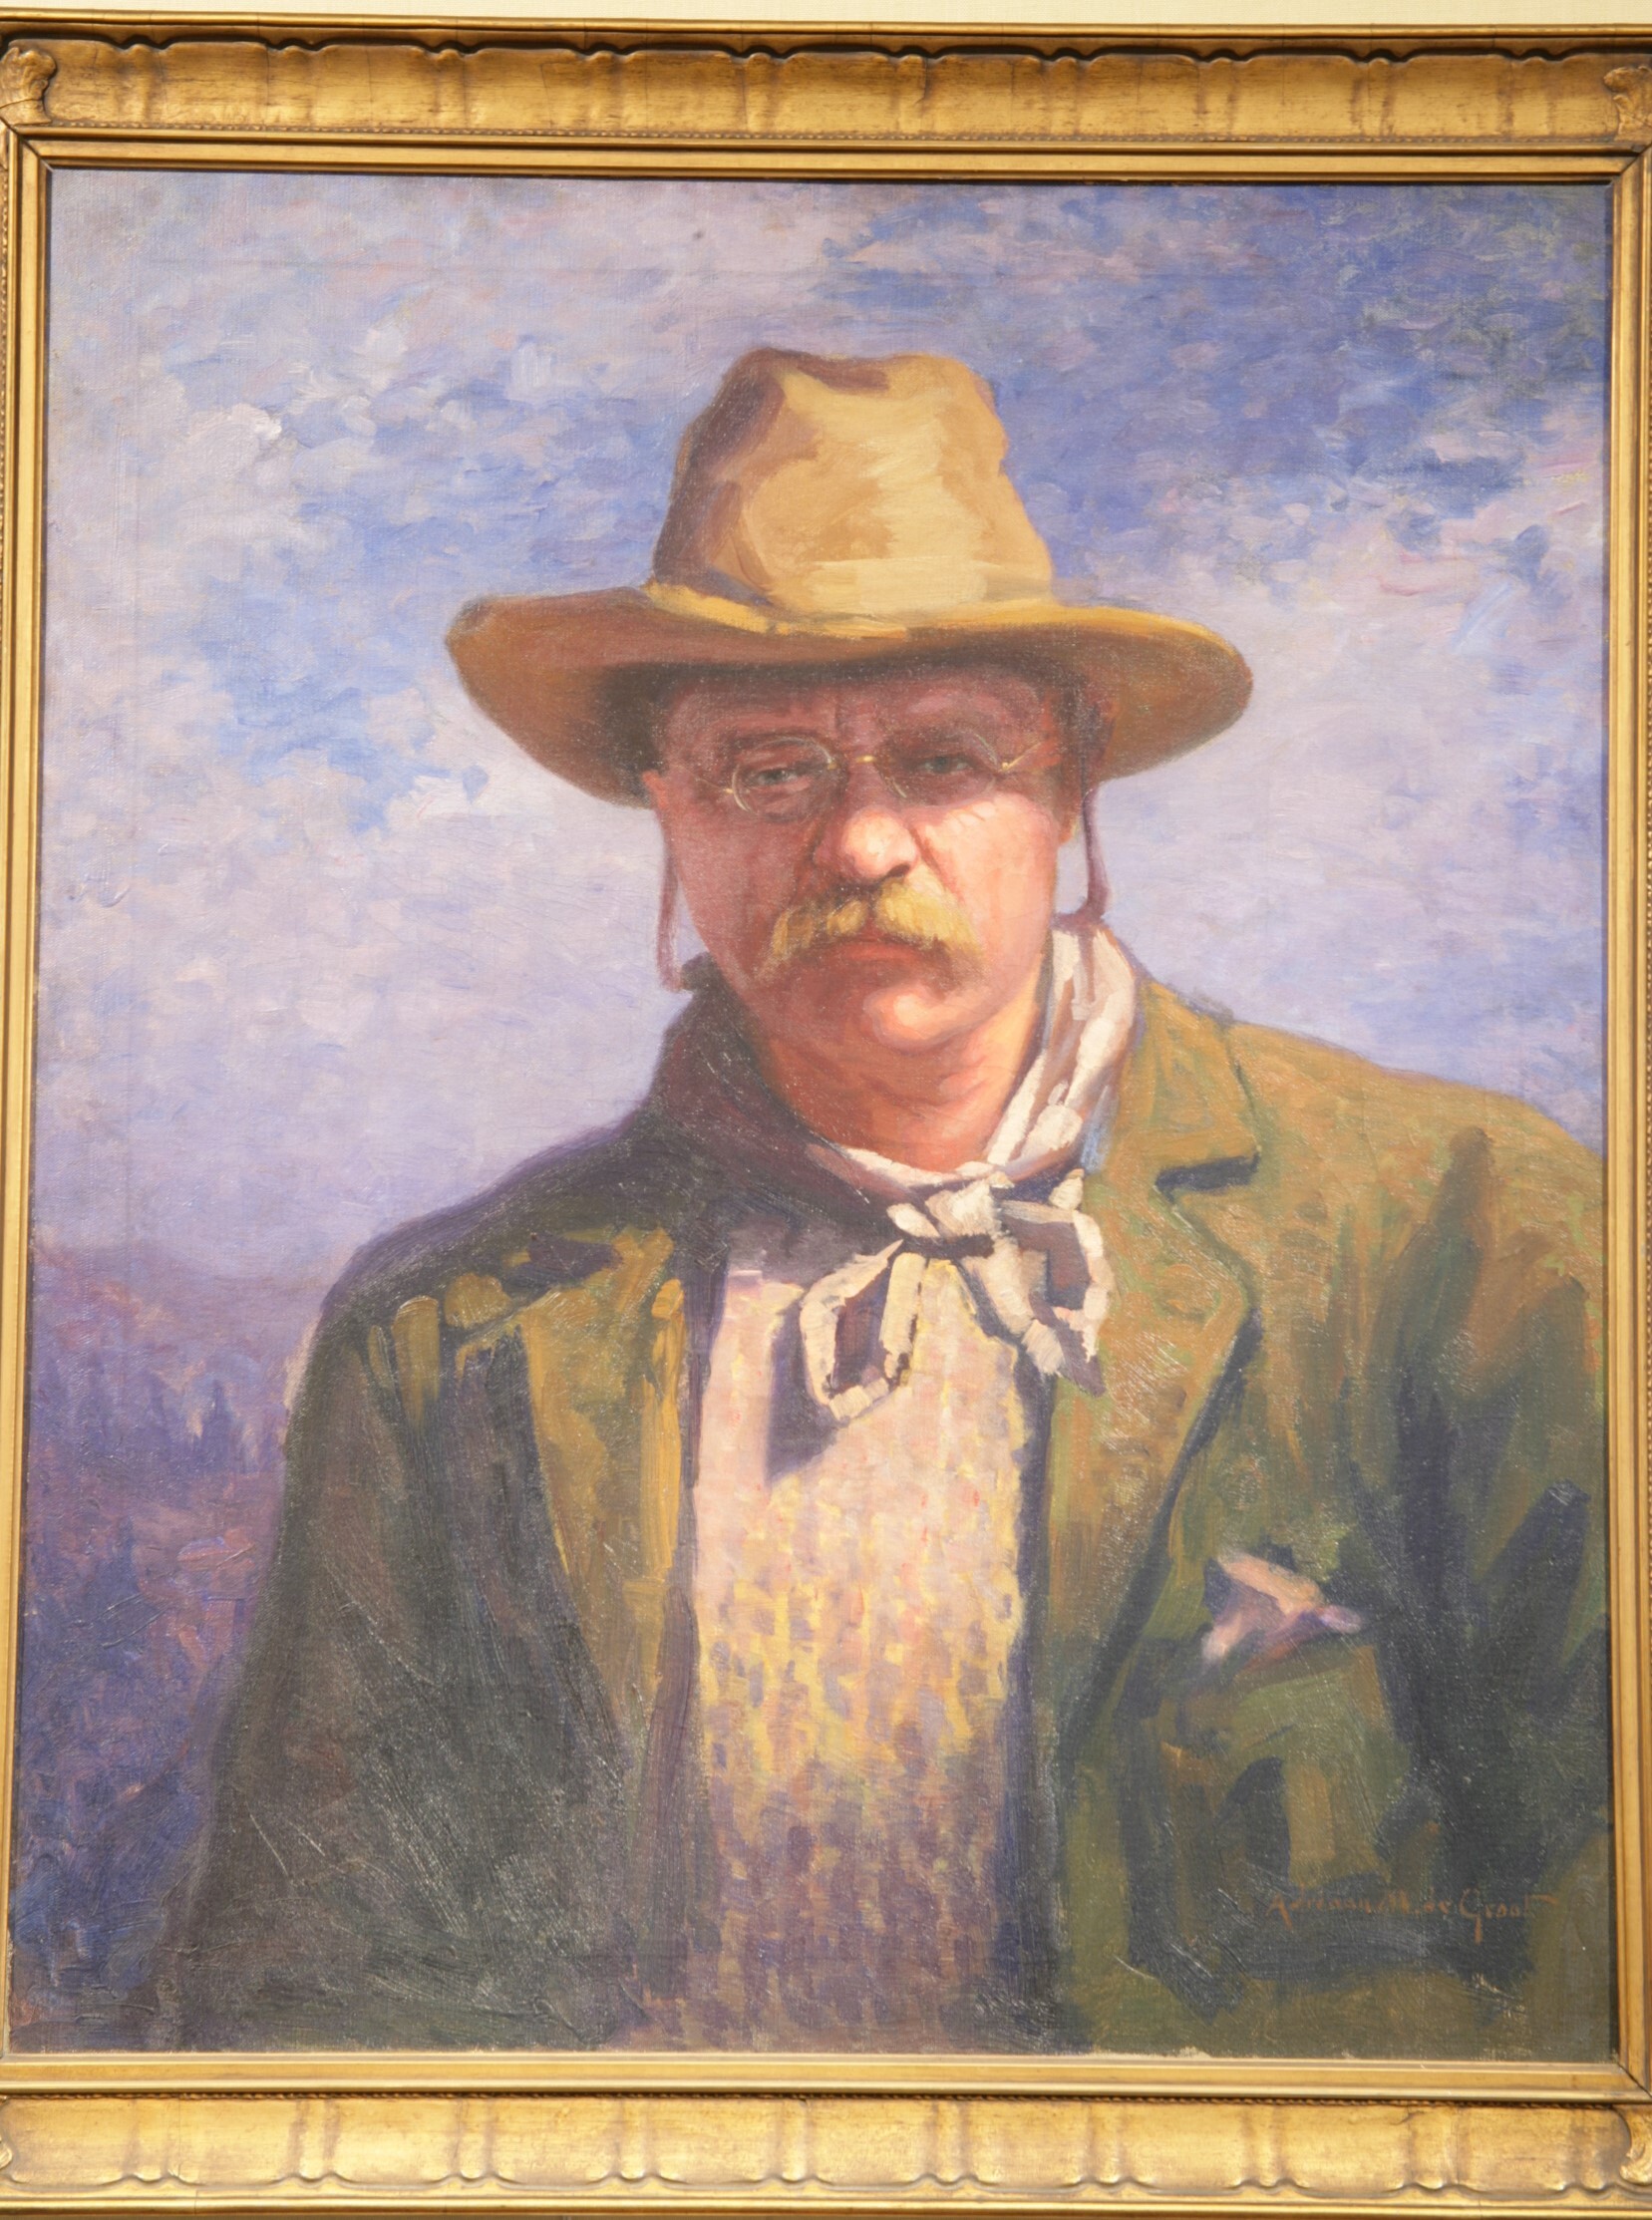 A portrait of Theodore Roosevelt's head and shoulders. He has a mustache and is wearing pince-nez glasses and a large brimmed hat. He has an open coat, a bandanna tied around his neck, and a handkerchief in his pocket. He looks intently at the viewer with a serious expression. The colors of the portrait are soft yellow, blue, and brown. The strokes are impressionistic in style.